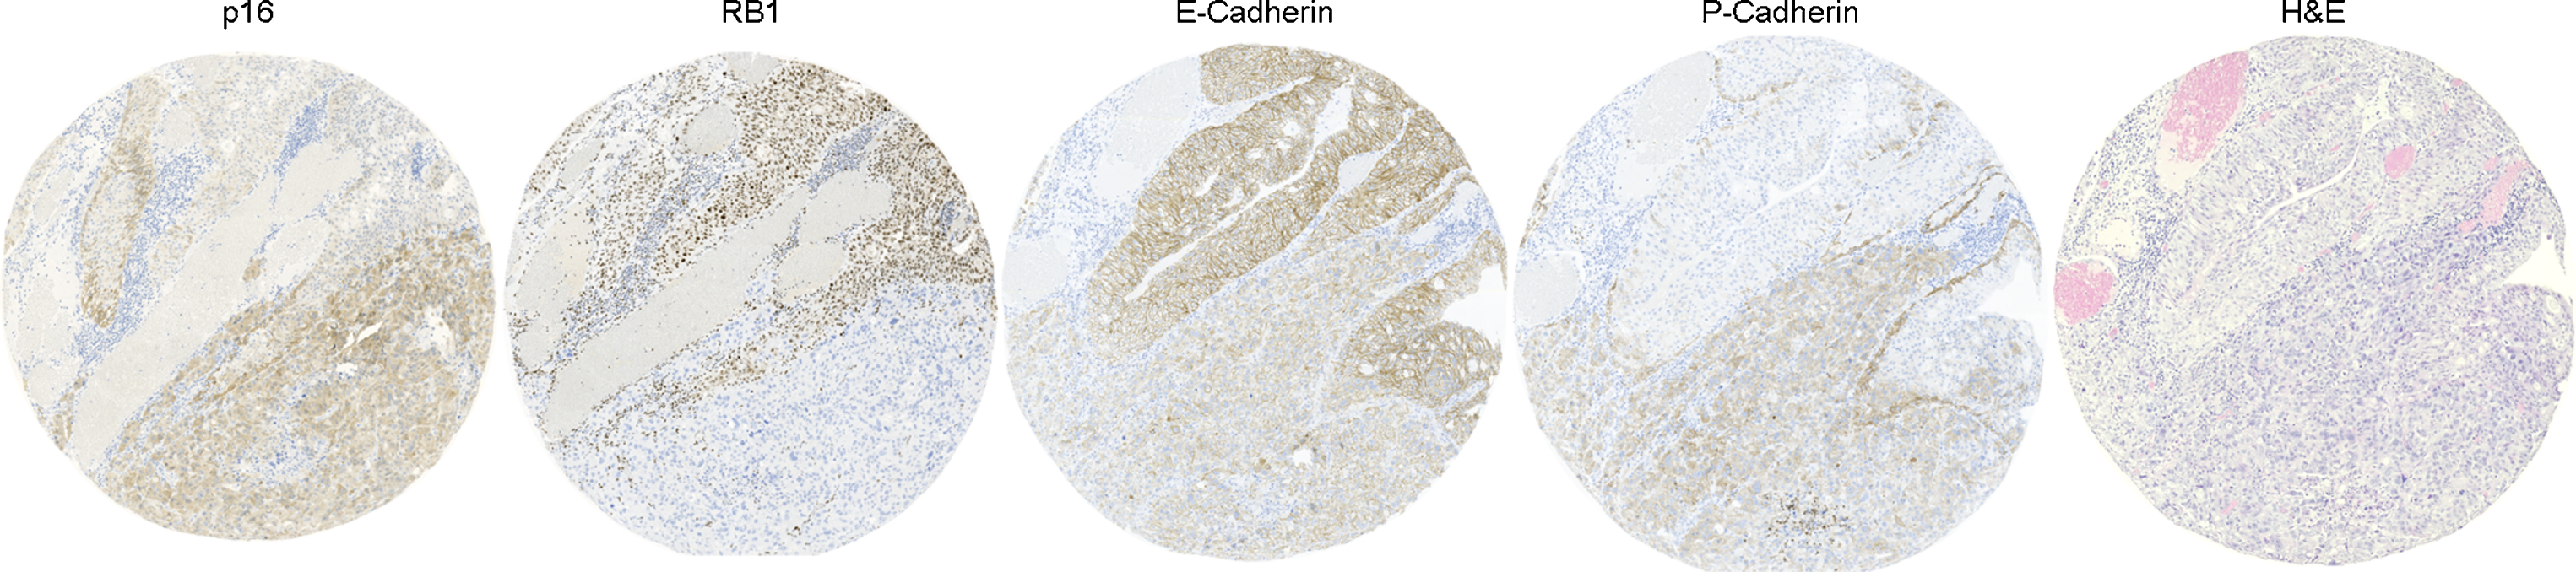 Representative case showing intracore heterogeneity. Routine hematoxylin-eosin staining (H&E) and four markers (E-Cadherin, p16, P-Cadherin and RB1) are shown.